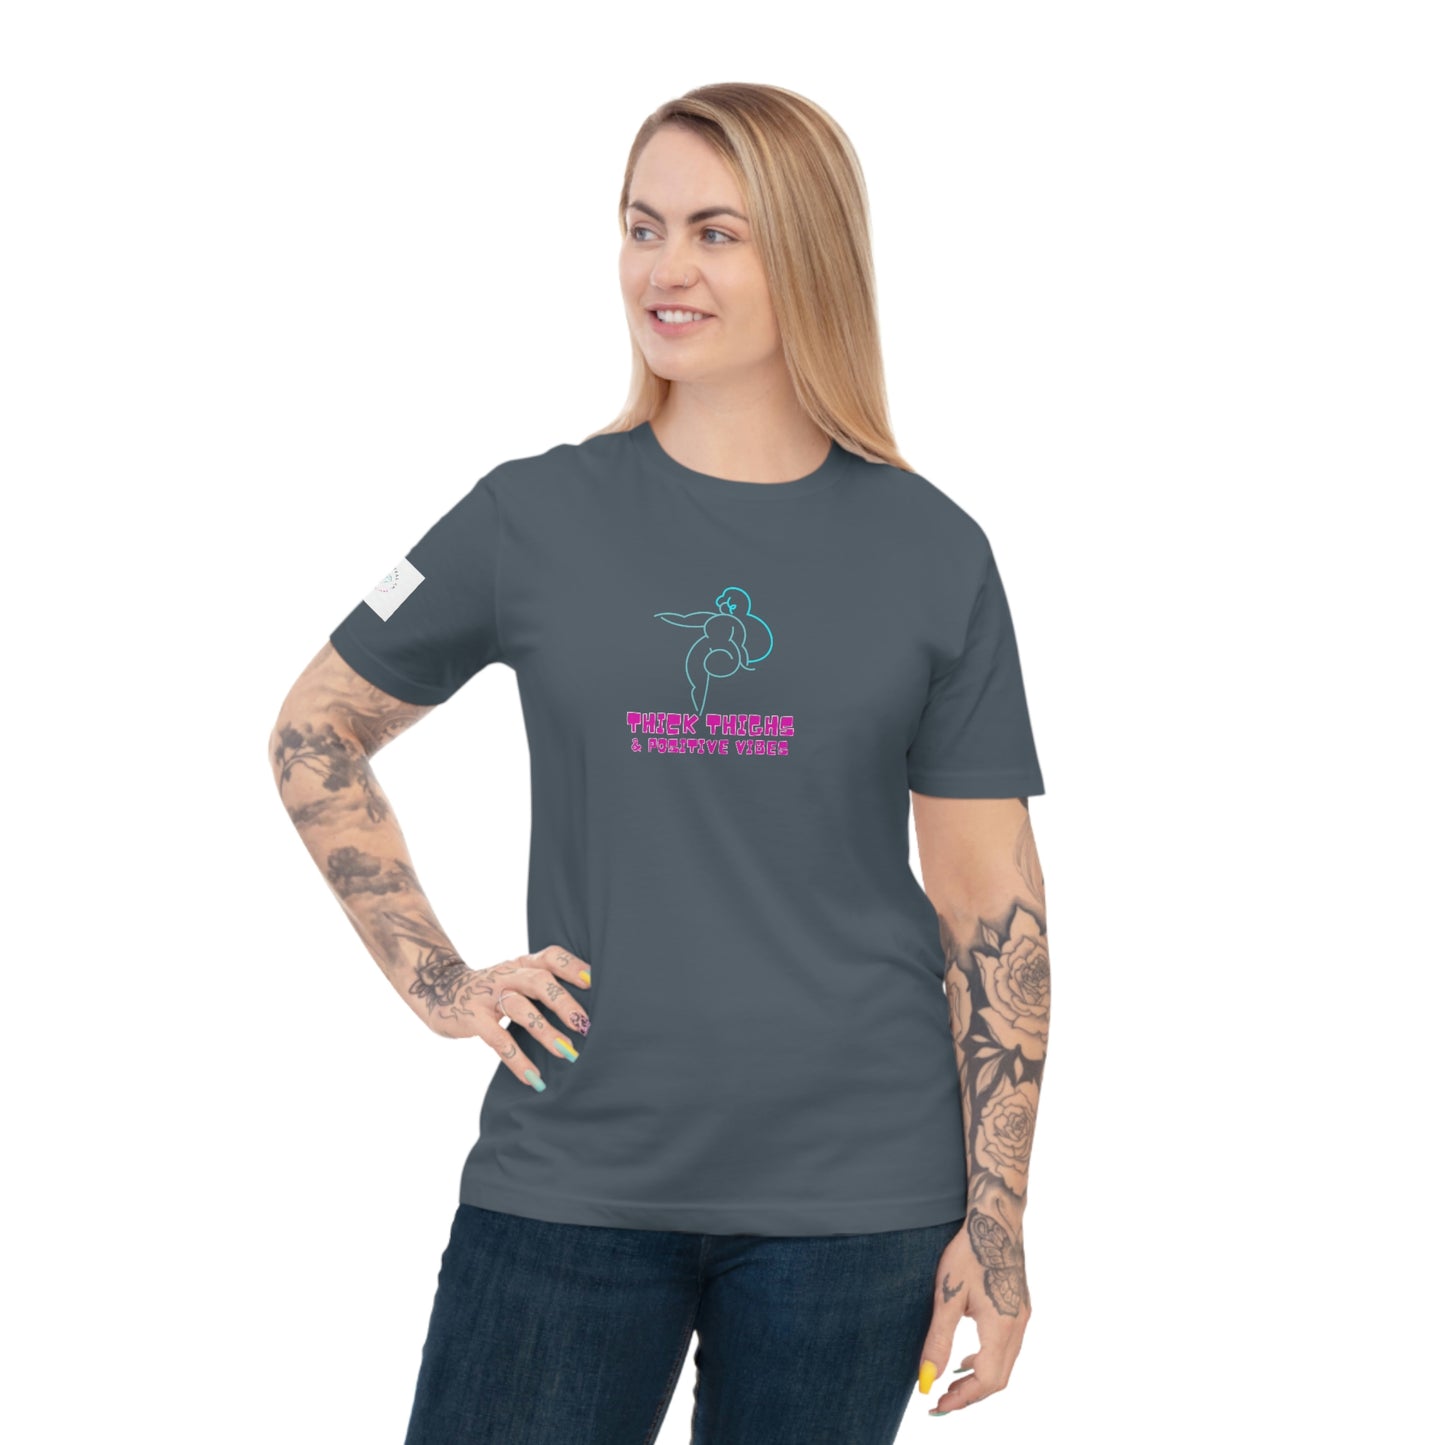 Thick Thighs & Positive Vibes T-shirt